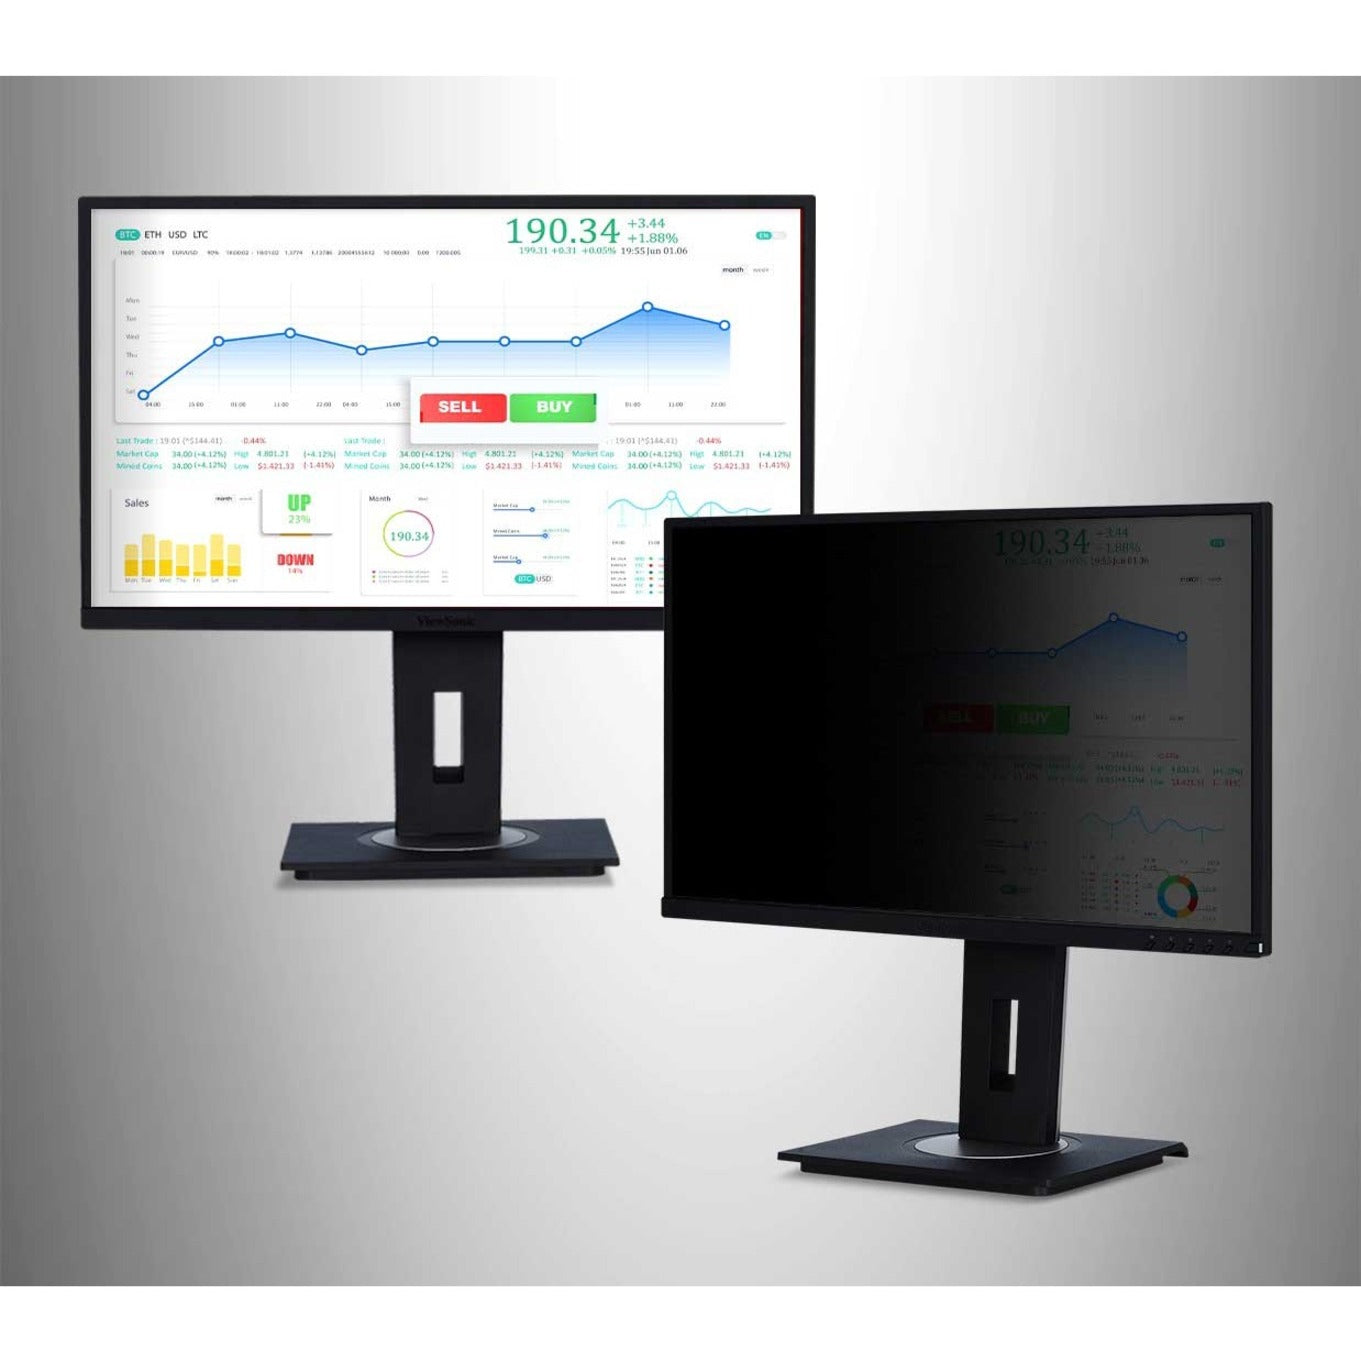 ViewSonic VG2448-PF 24 Inch IPS 1080p Ergonomic Monitor with Built-In Privacy Filter HDMI DisplayPort USB and 40 Degree Tilt